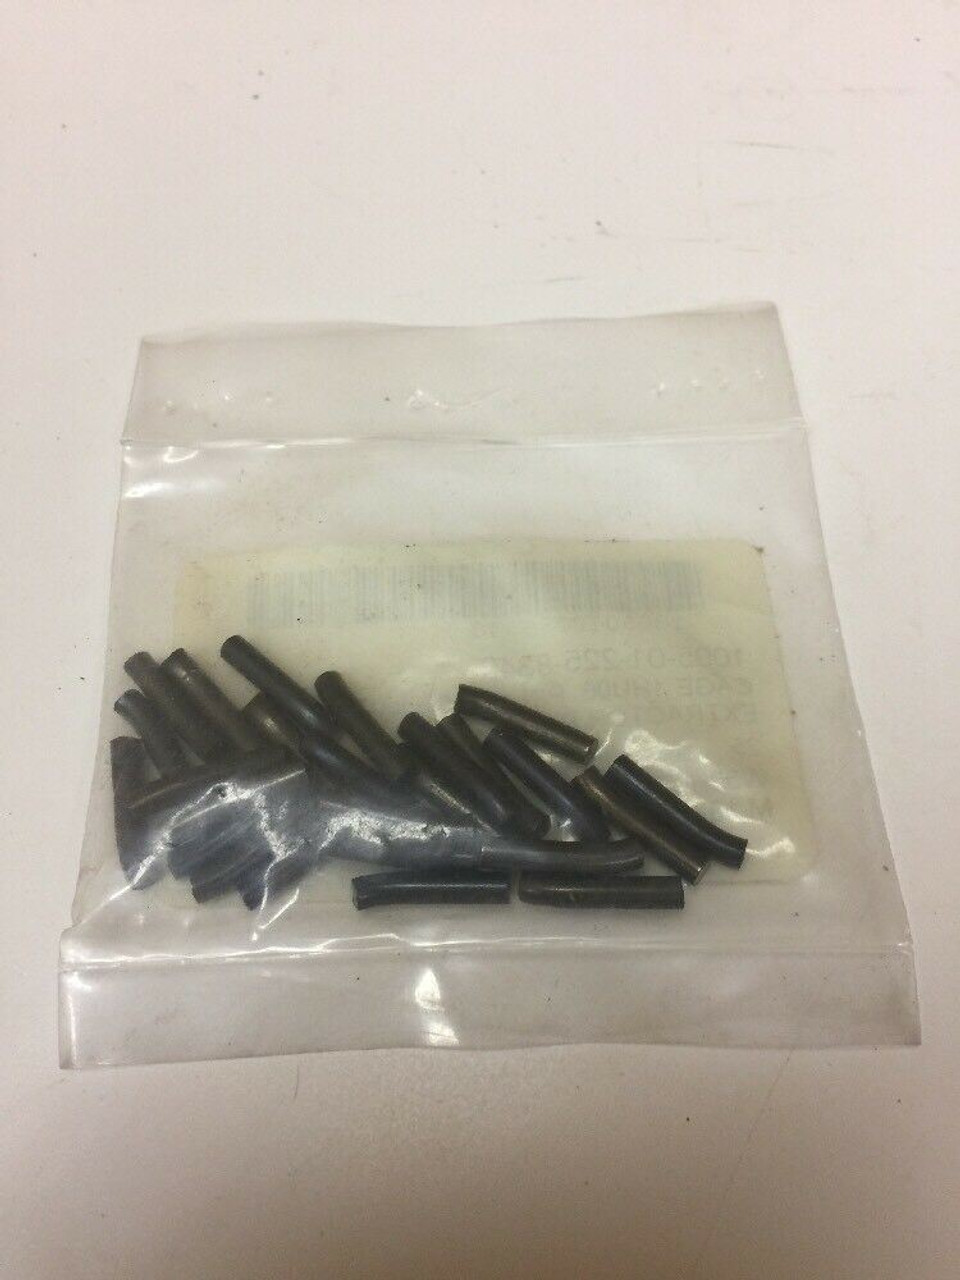 Extractor Pin 9350086 Black Military Lot of 25